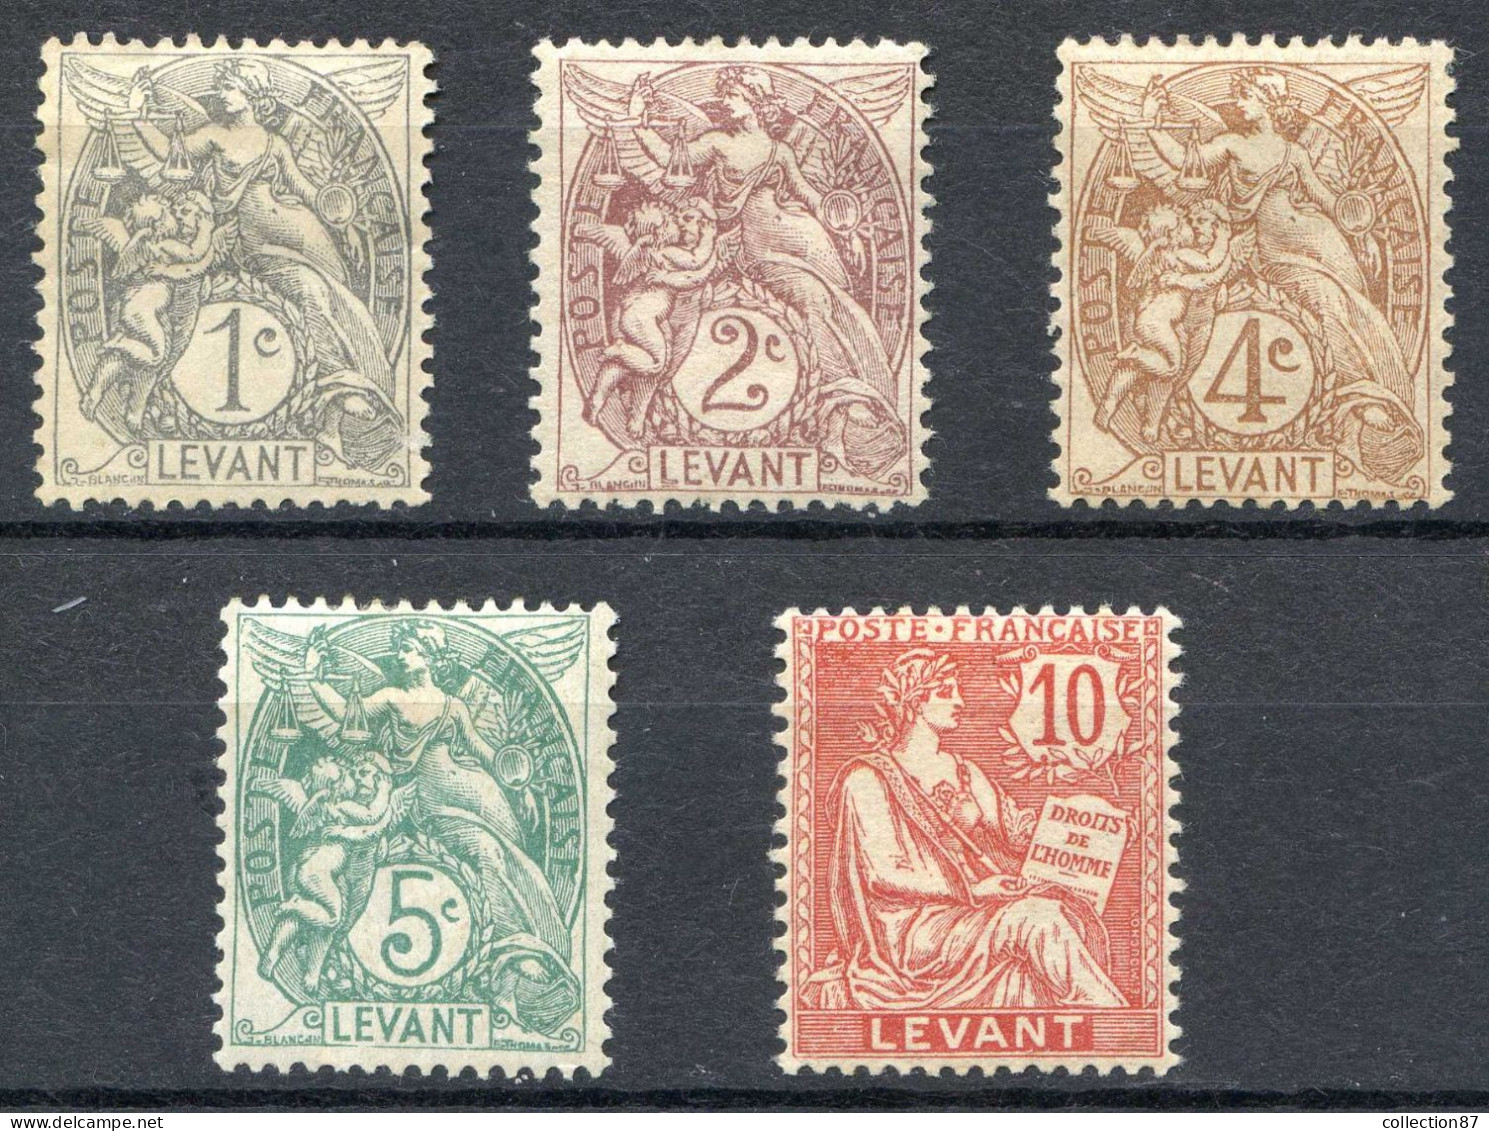 REF 087 > LEVANT < N° 9 + 10 + 12 + 13 + 14 * < Neuf Ch - MH * - Unused Stamps